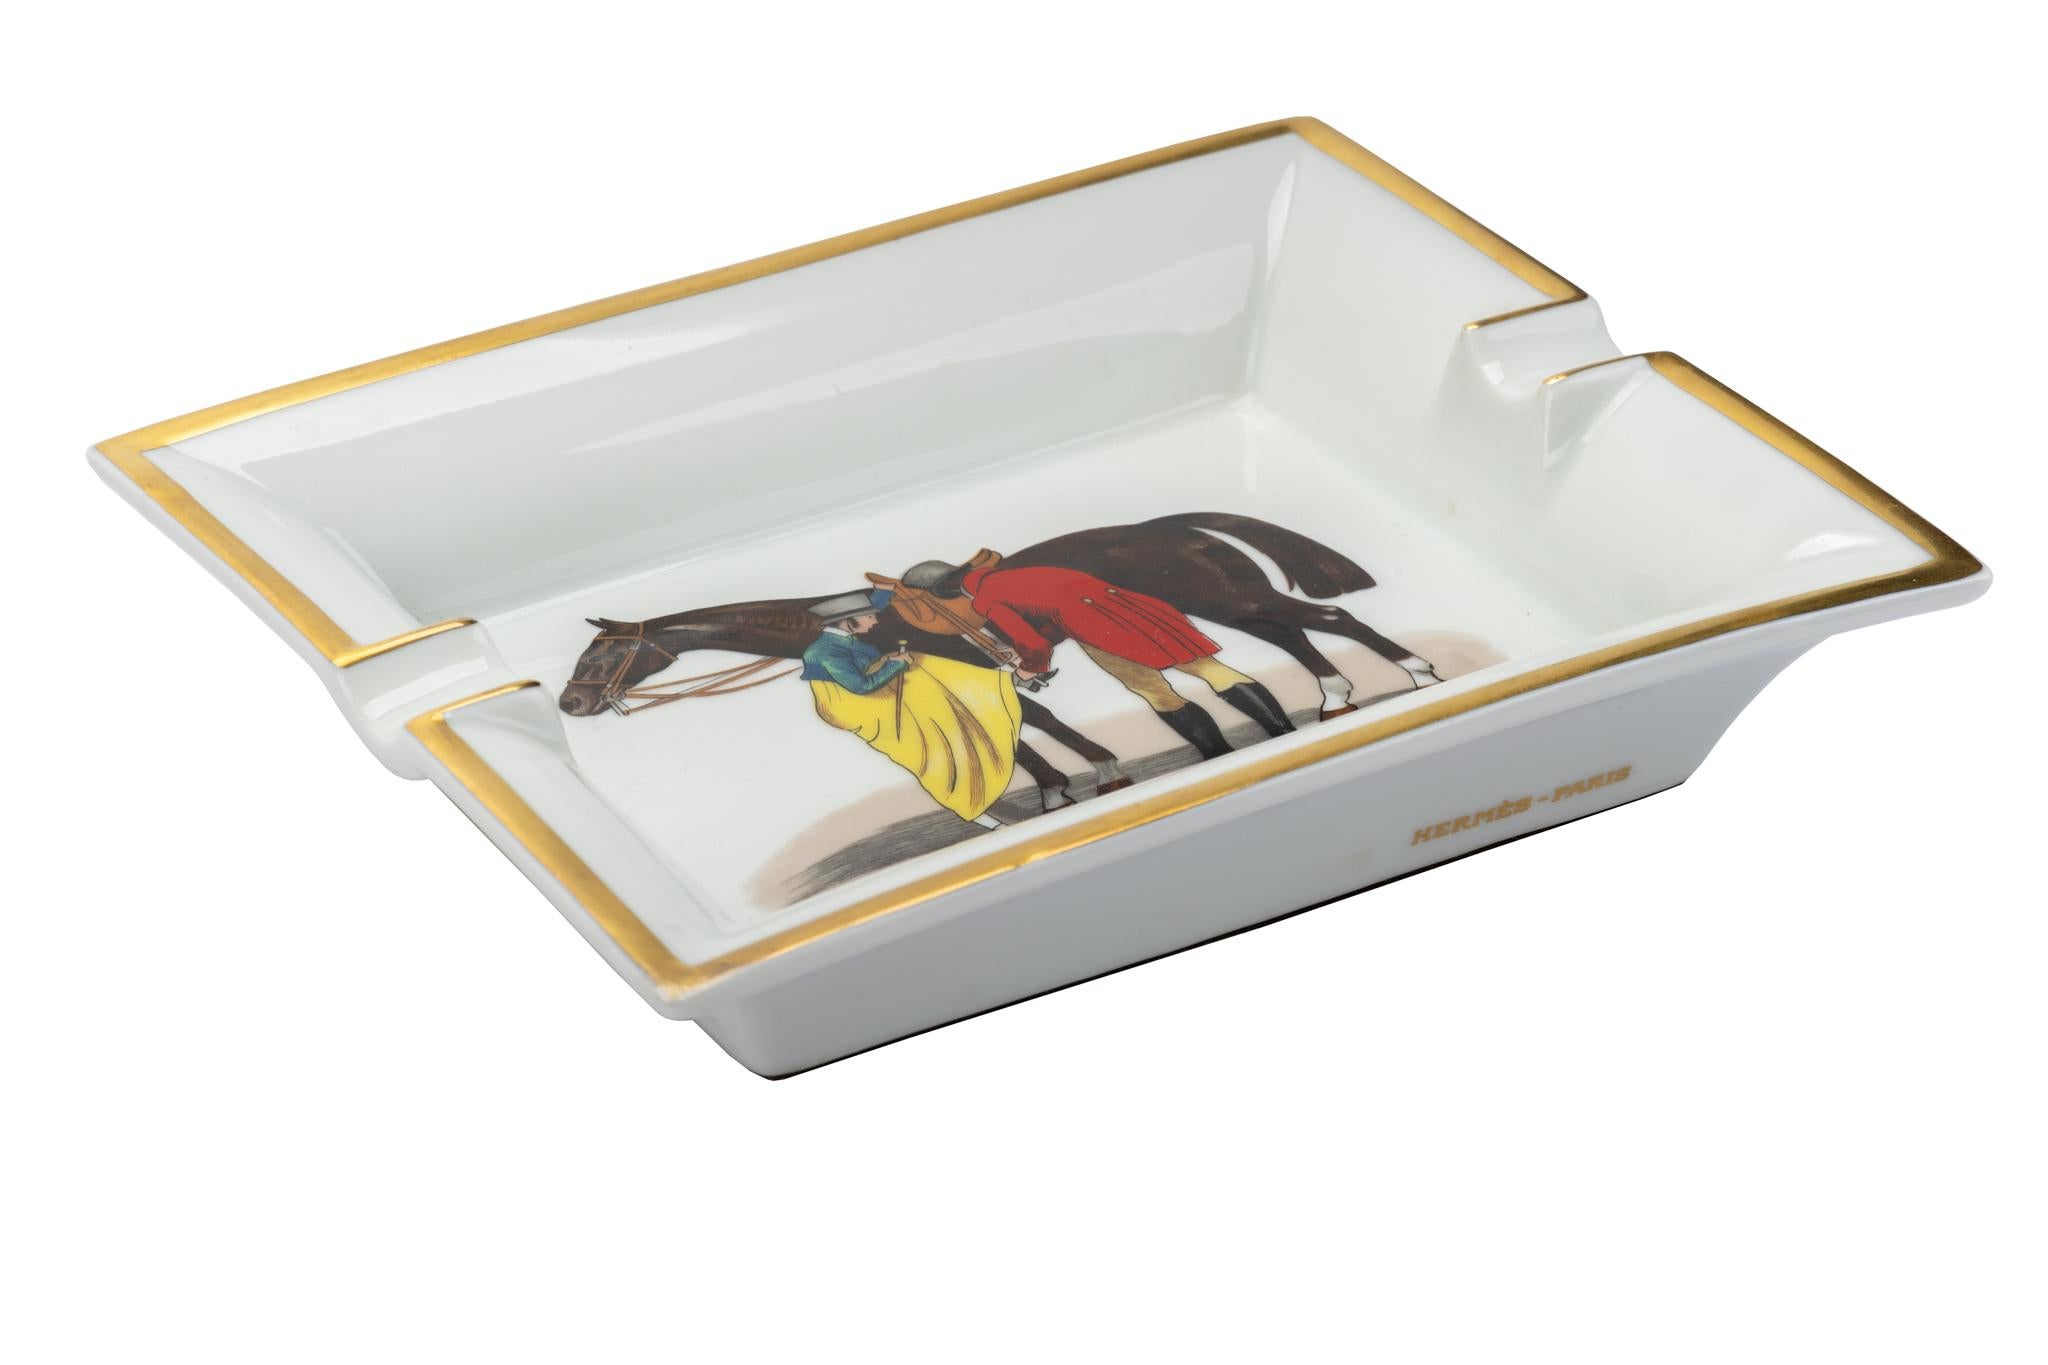 Hermes signature ashtray with bird design in brown, yellow and gold. Suede stamped bottom. Made in France.